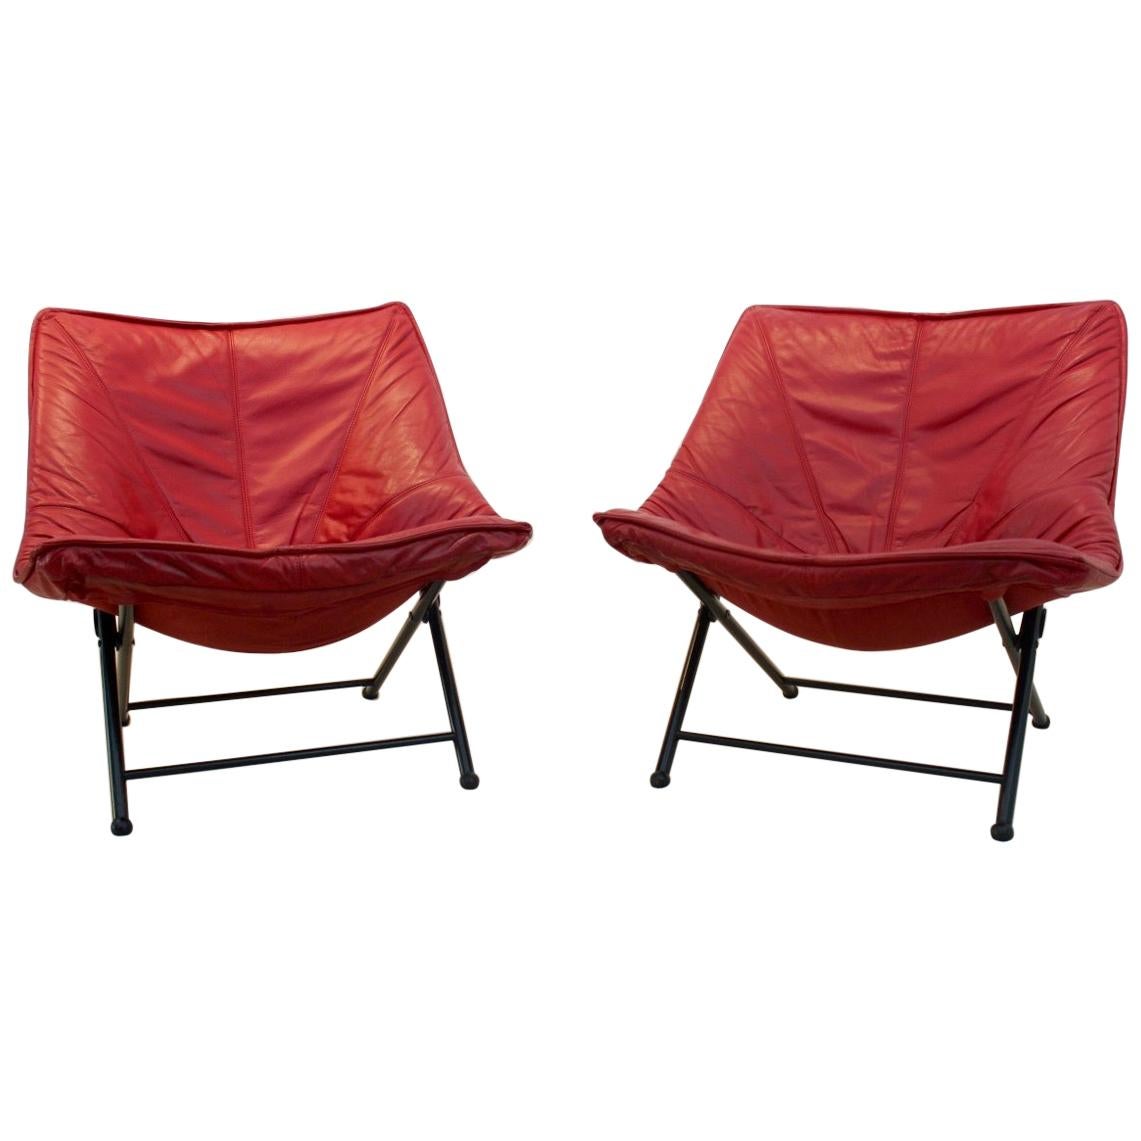 Exquisite Set of Molinari Foldable Easy Chairs Designed by Teun van Zanten 1970s